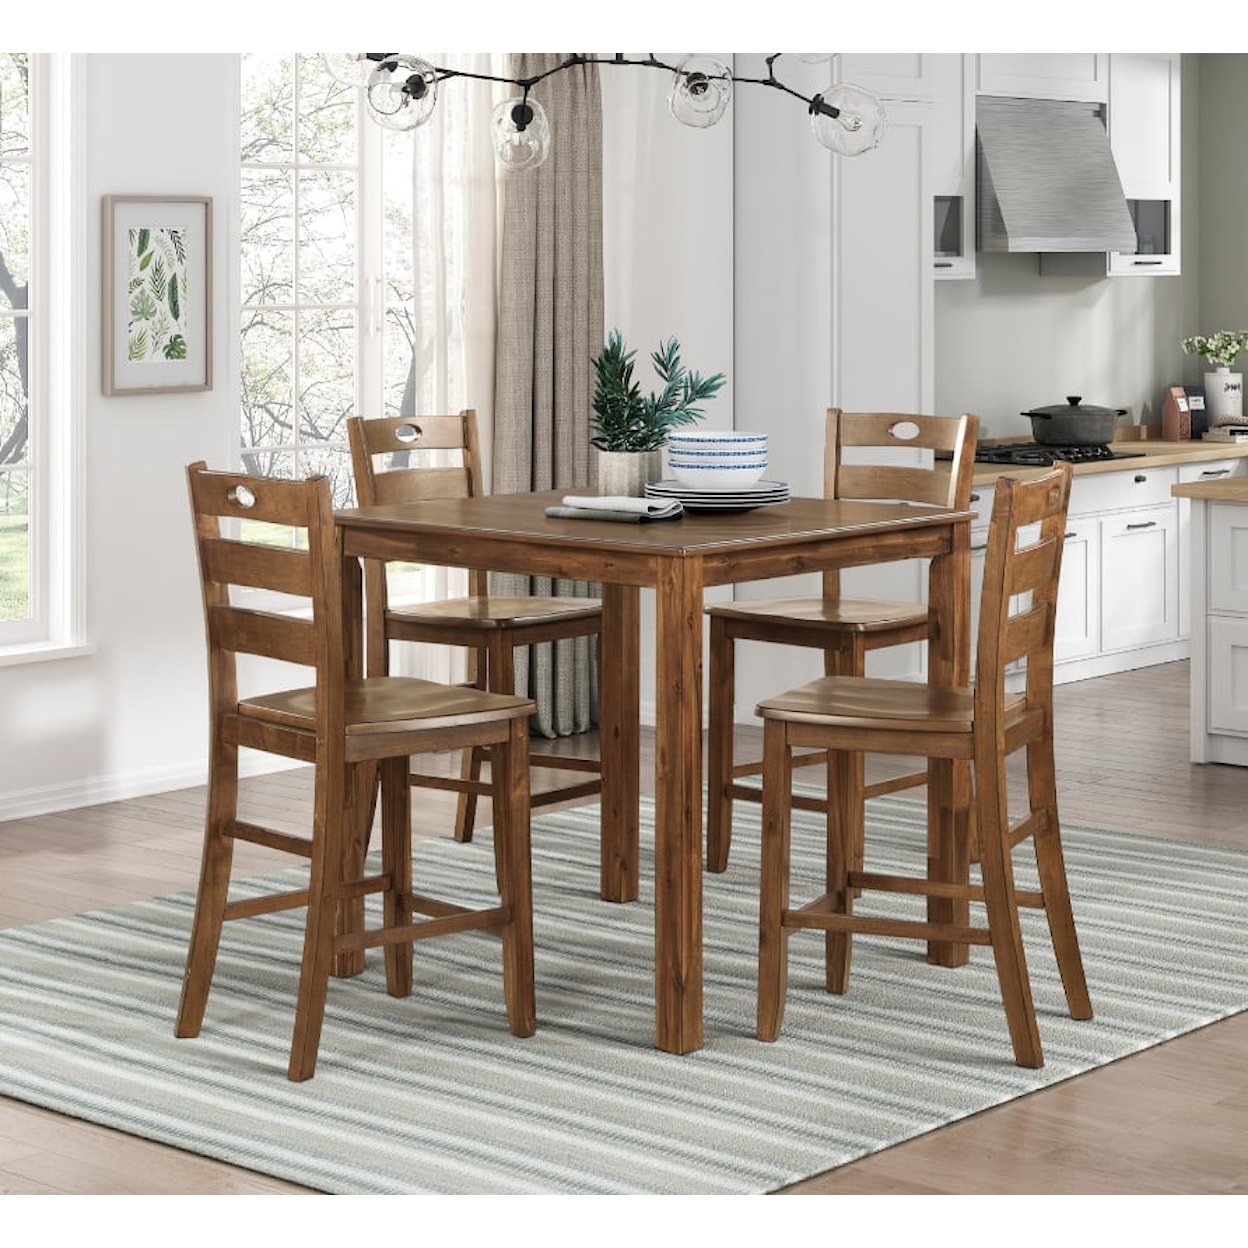 Homelegance Furniture Stowe 5-Piece Counter Height Dining Set